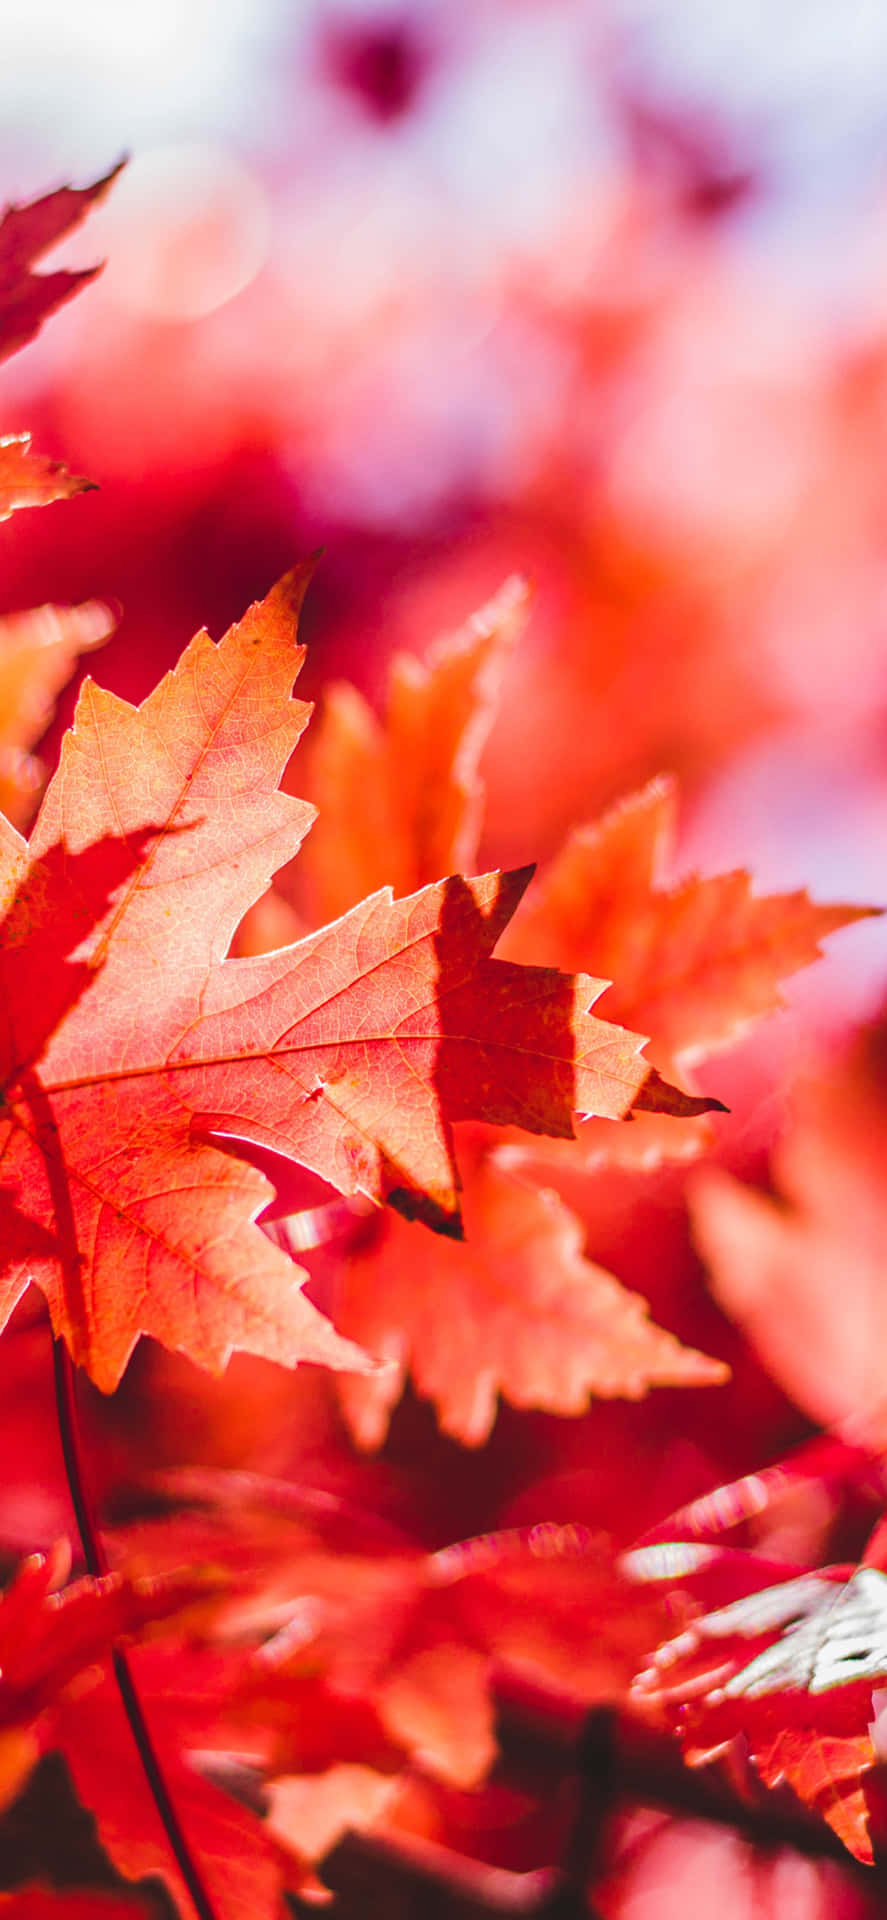 Capture the beauty of fall with this vibrant and stylish Fall Leaves iPhone wallpaper. Wallpaper